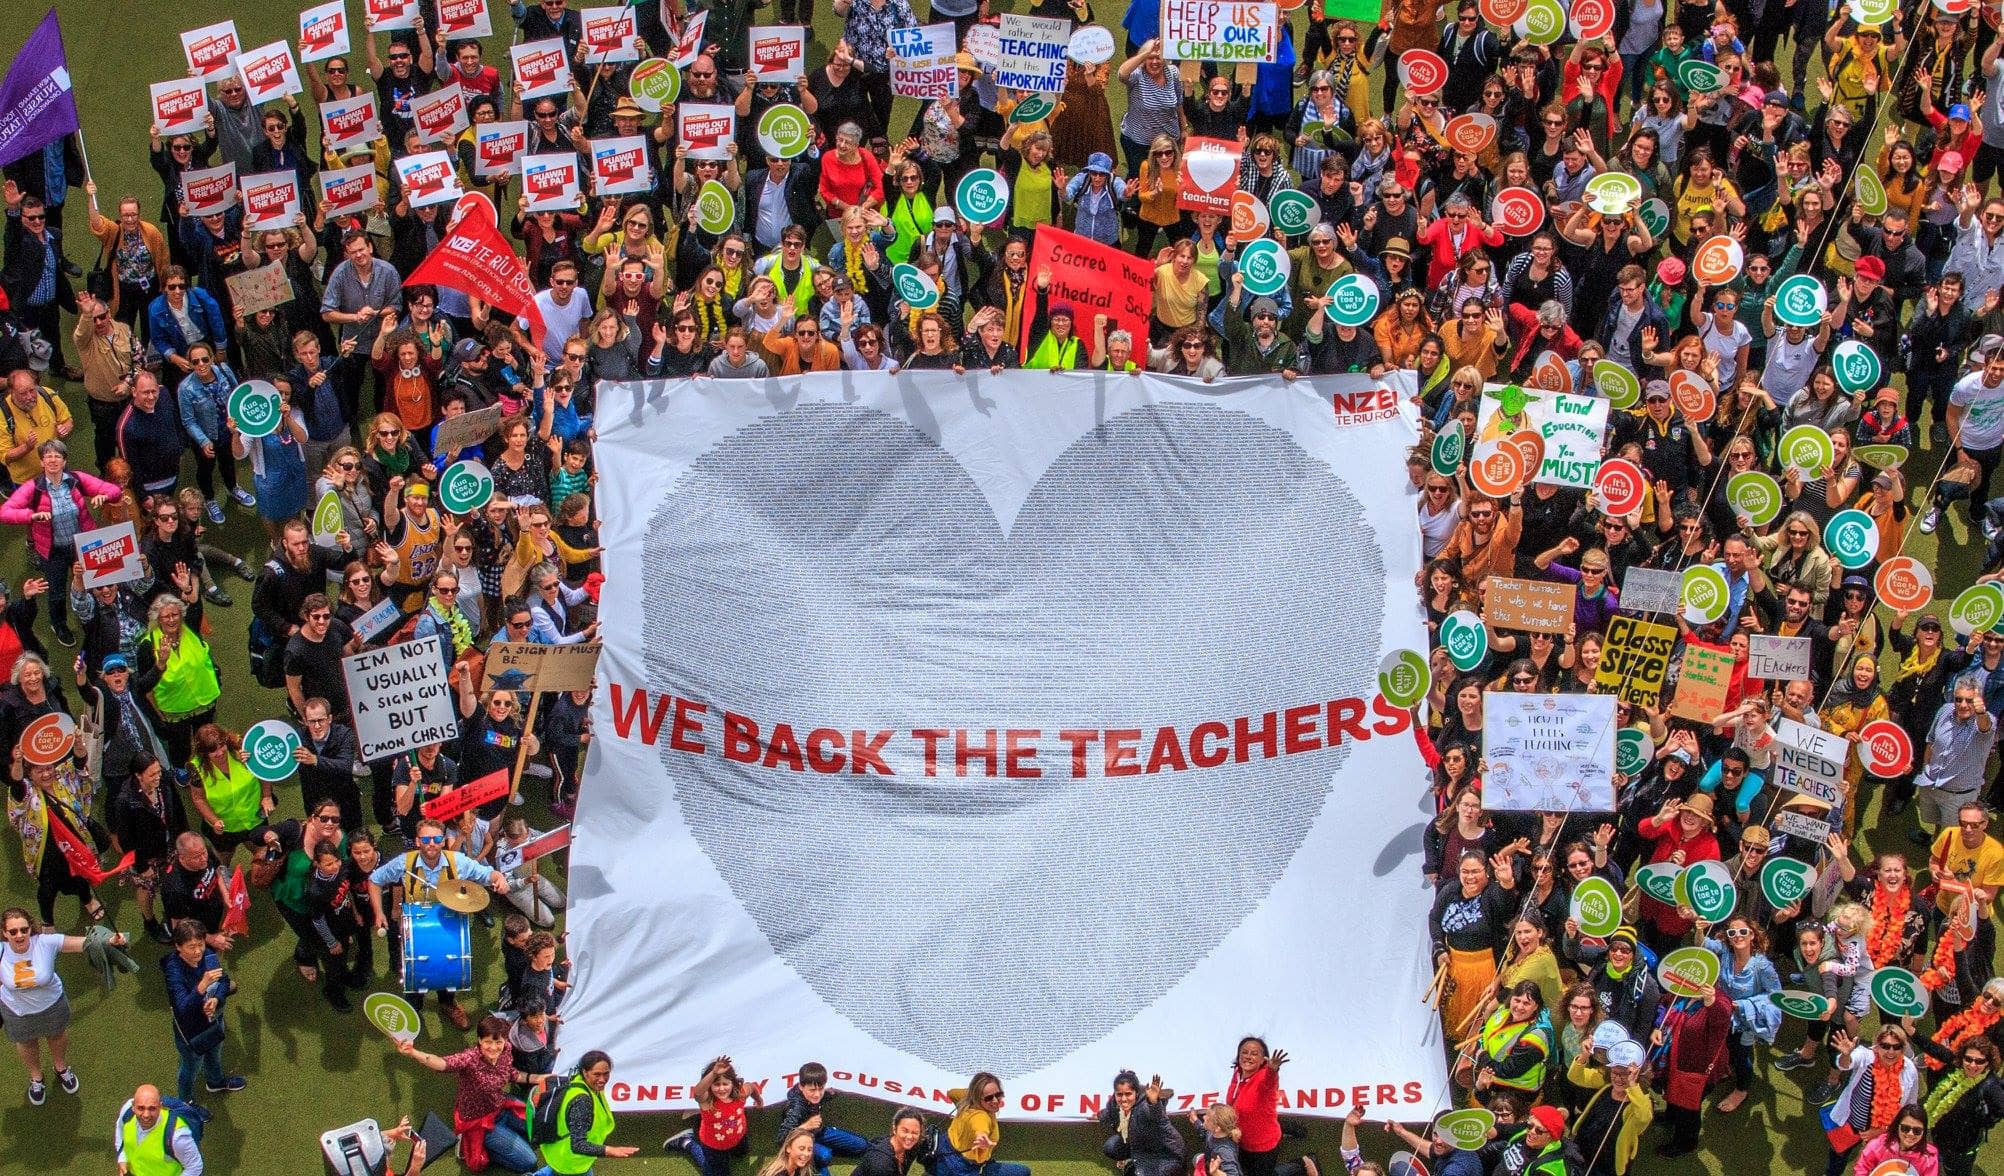 Huge and colorful crowd of union and teacher supporters in a field with a banner reading "We back the teachers"